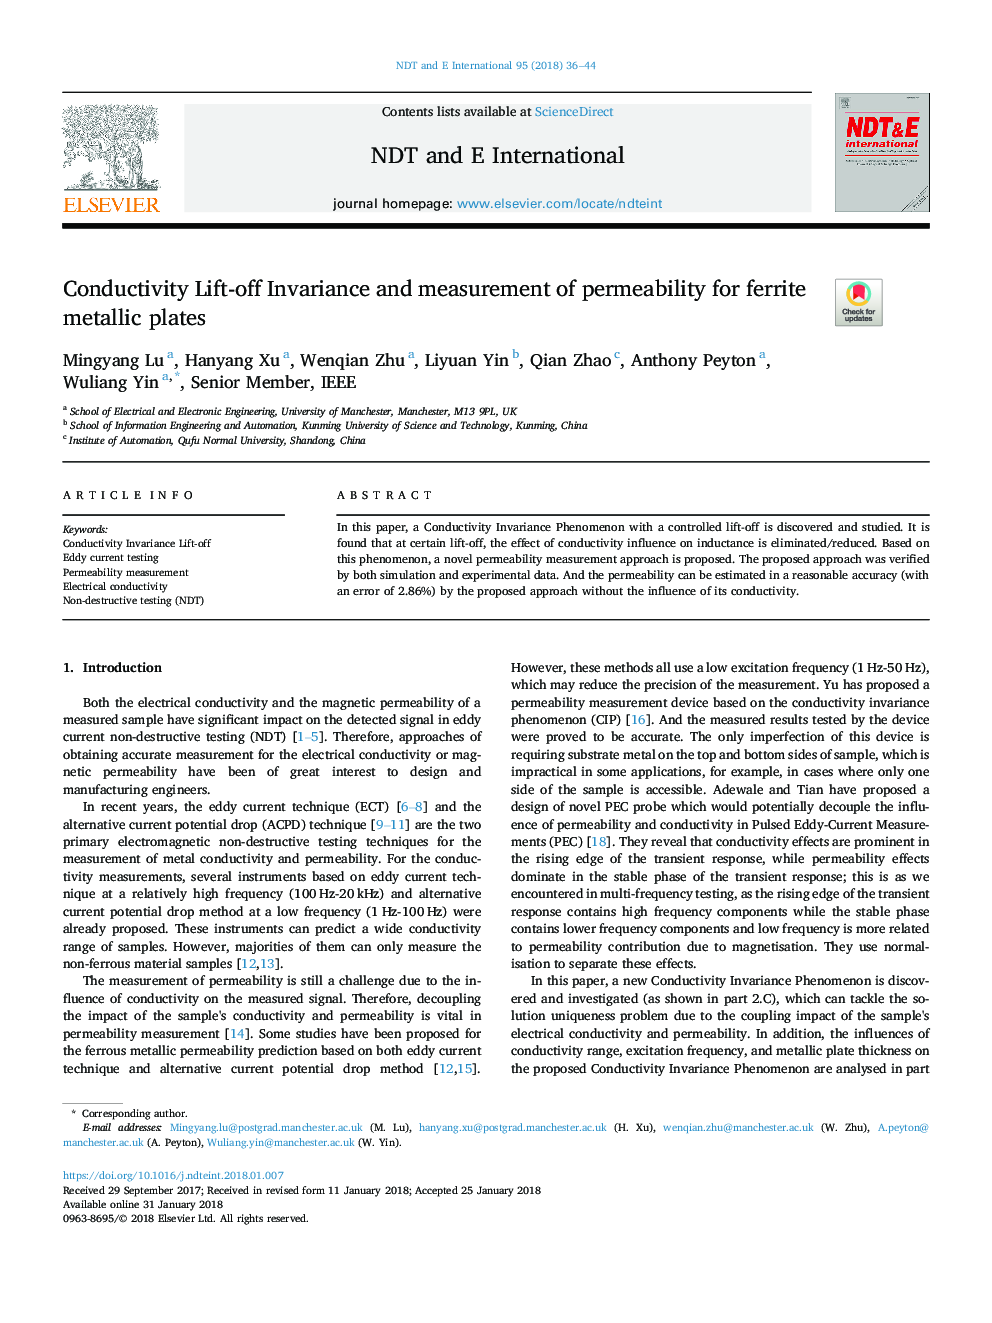 Conductivity Lift-off Invariance and measurement of permeability for ferrite metallic plates